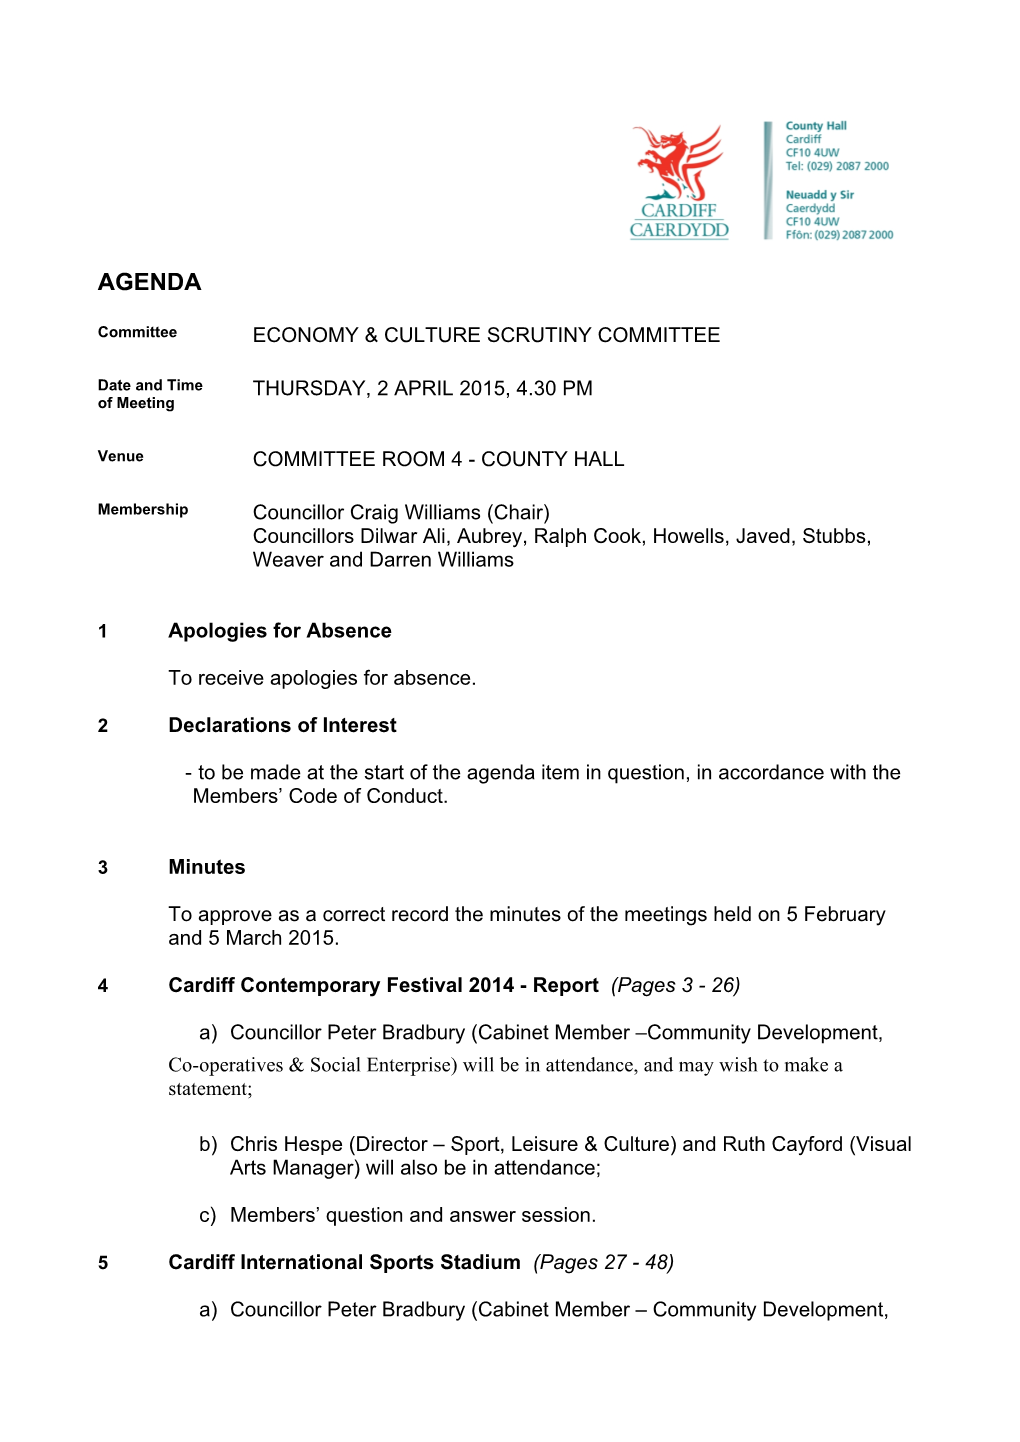 (Public Pack)Agenda Document for Economy & Culture Scrutiny Committee, 02/04/2015 16:30